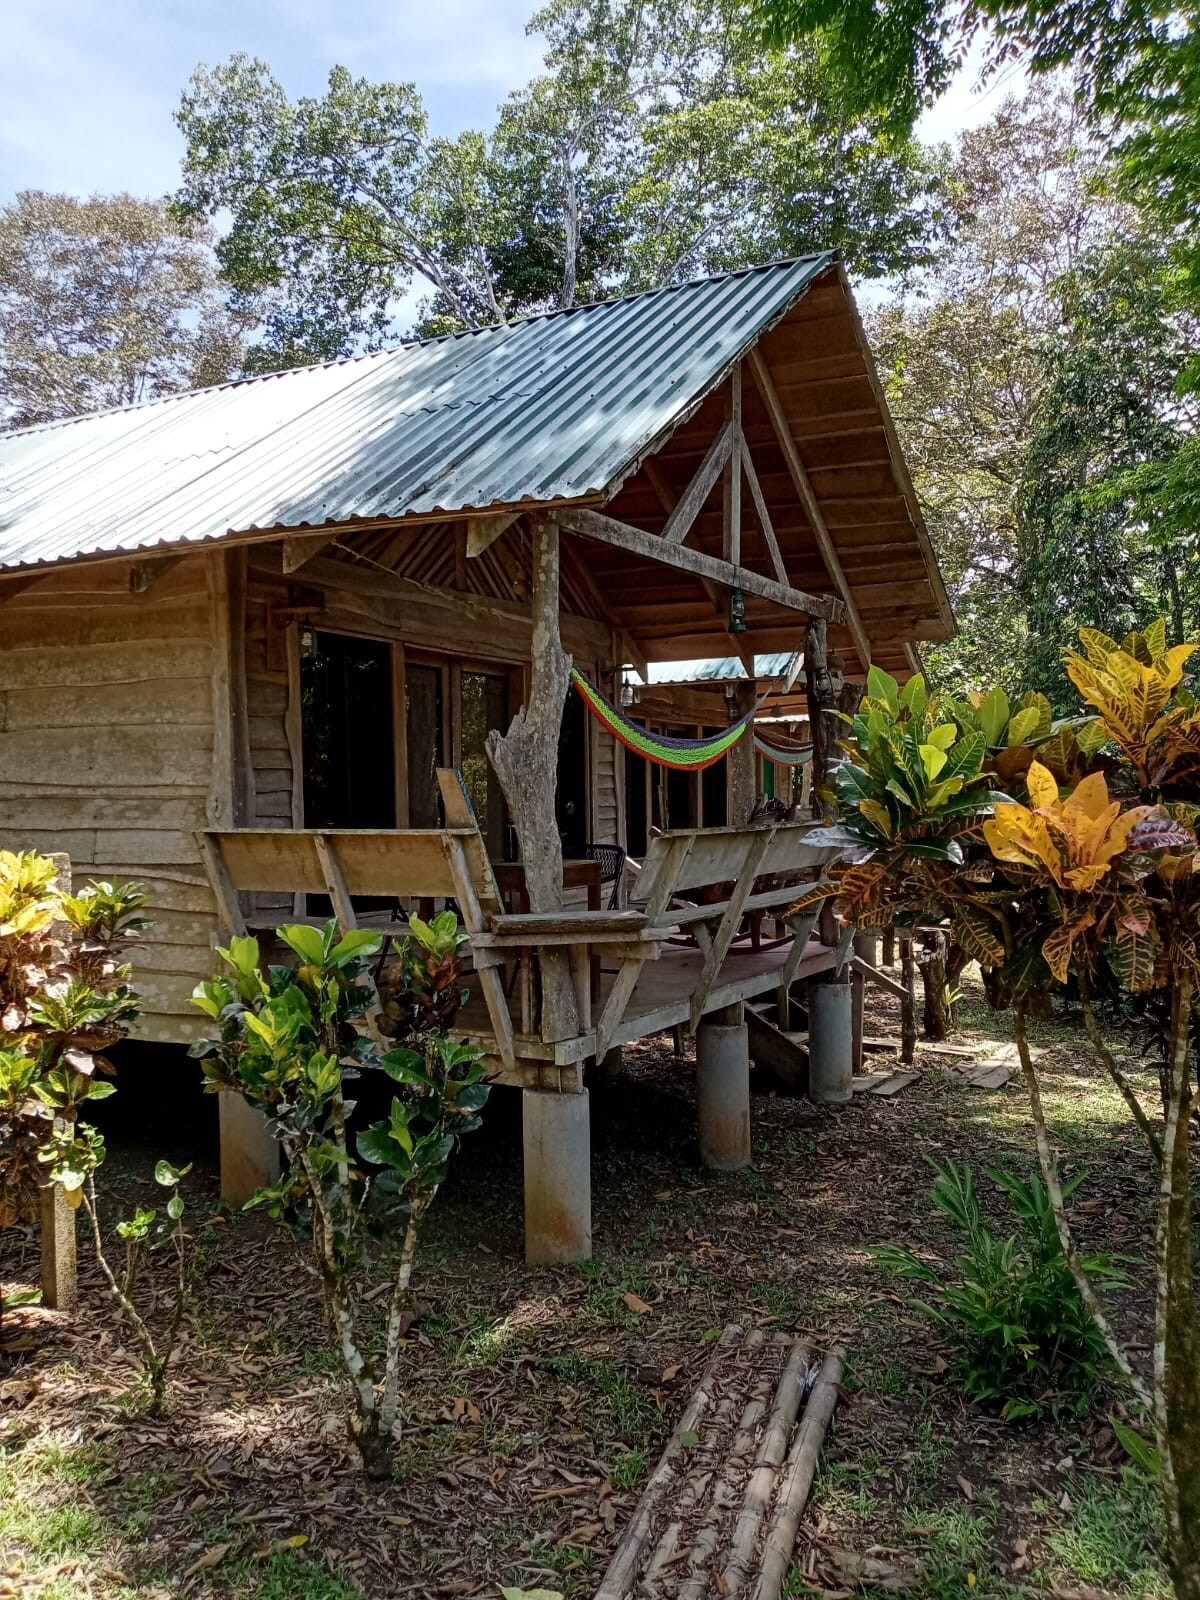 Magical bungalow in the jungle